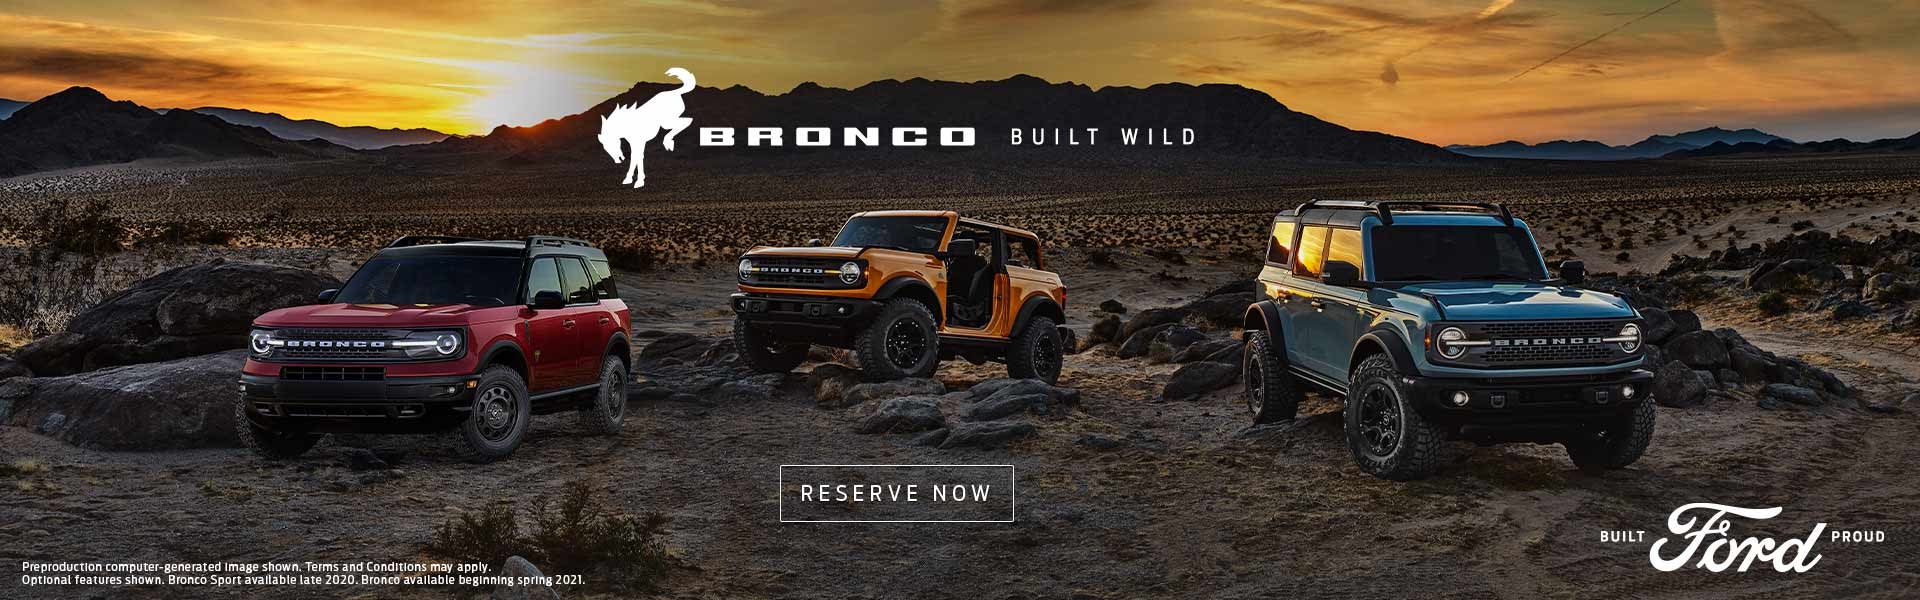 Reserve your Bronco Now!